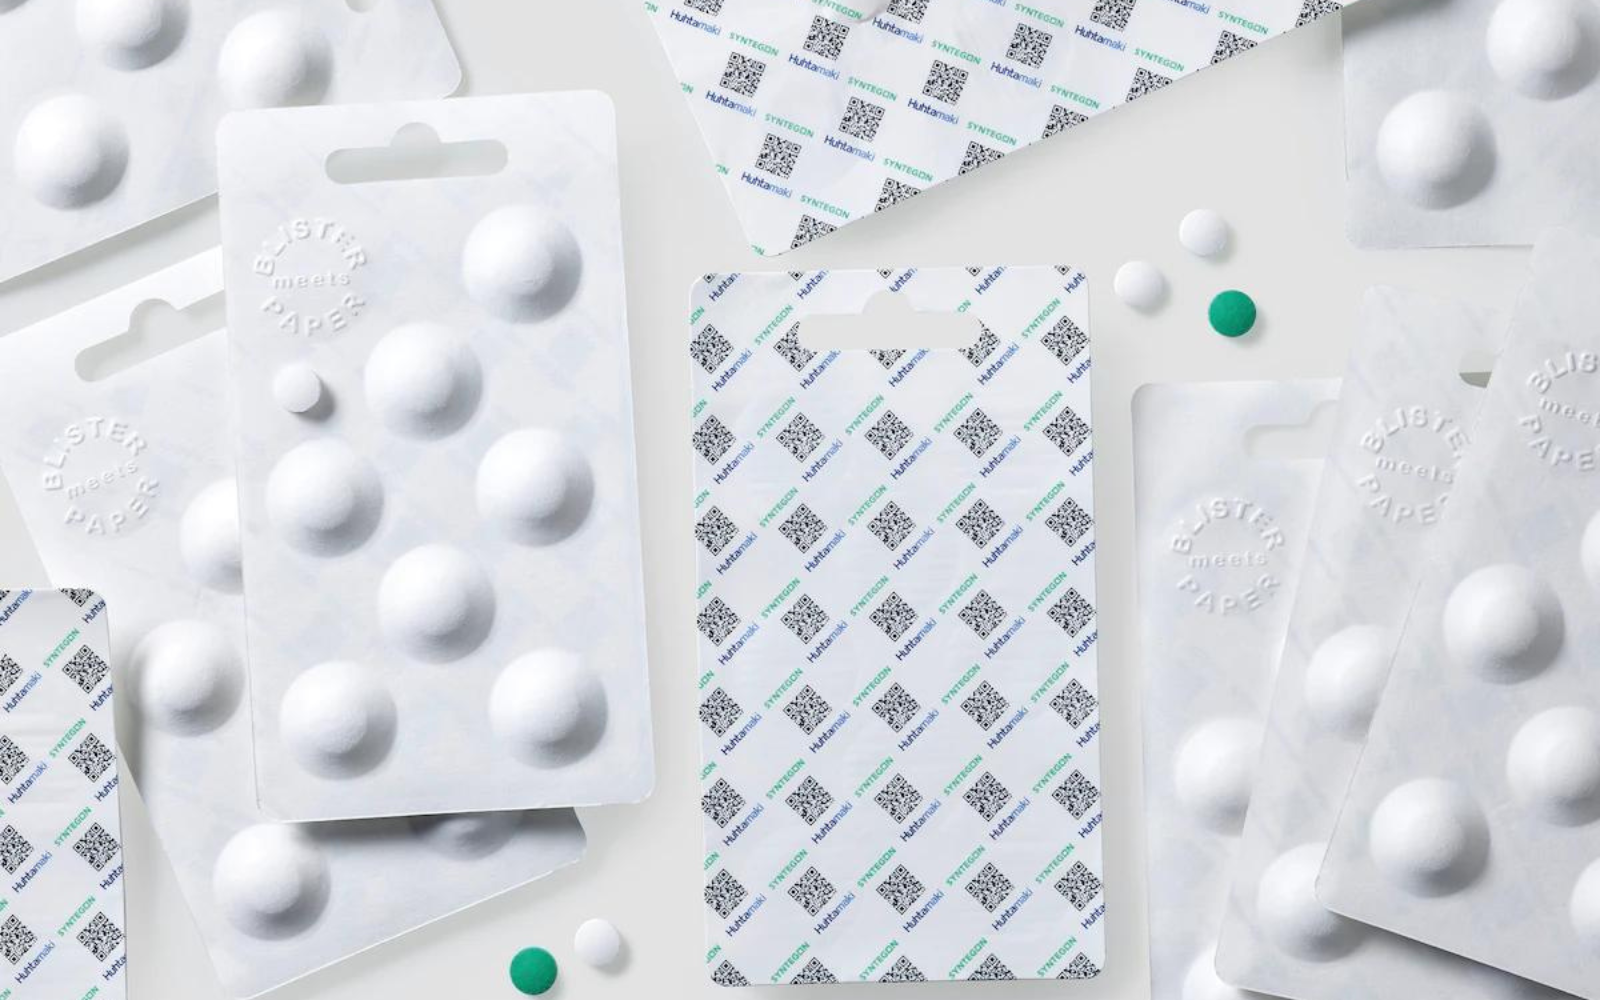 A Solution to Medical Waste: Introducing Plastic-Free Blister Packs